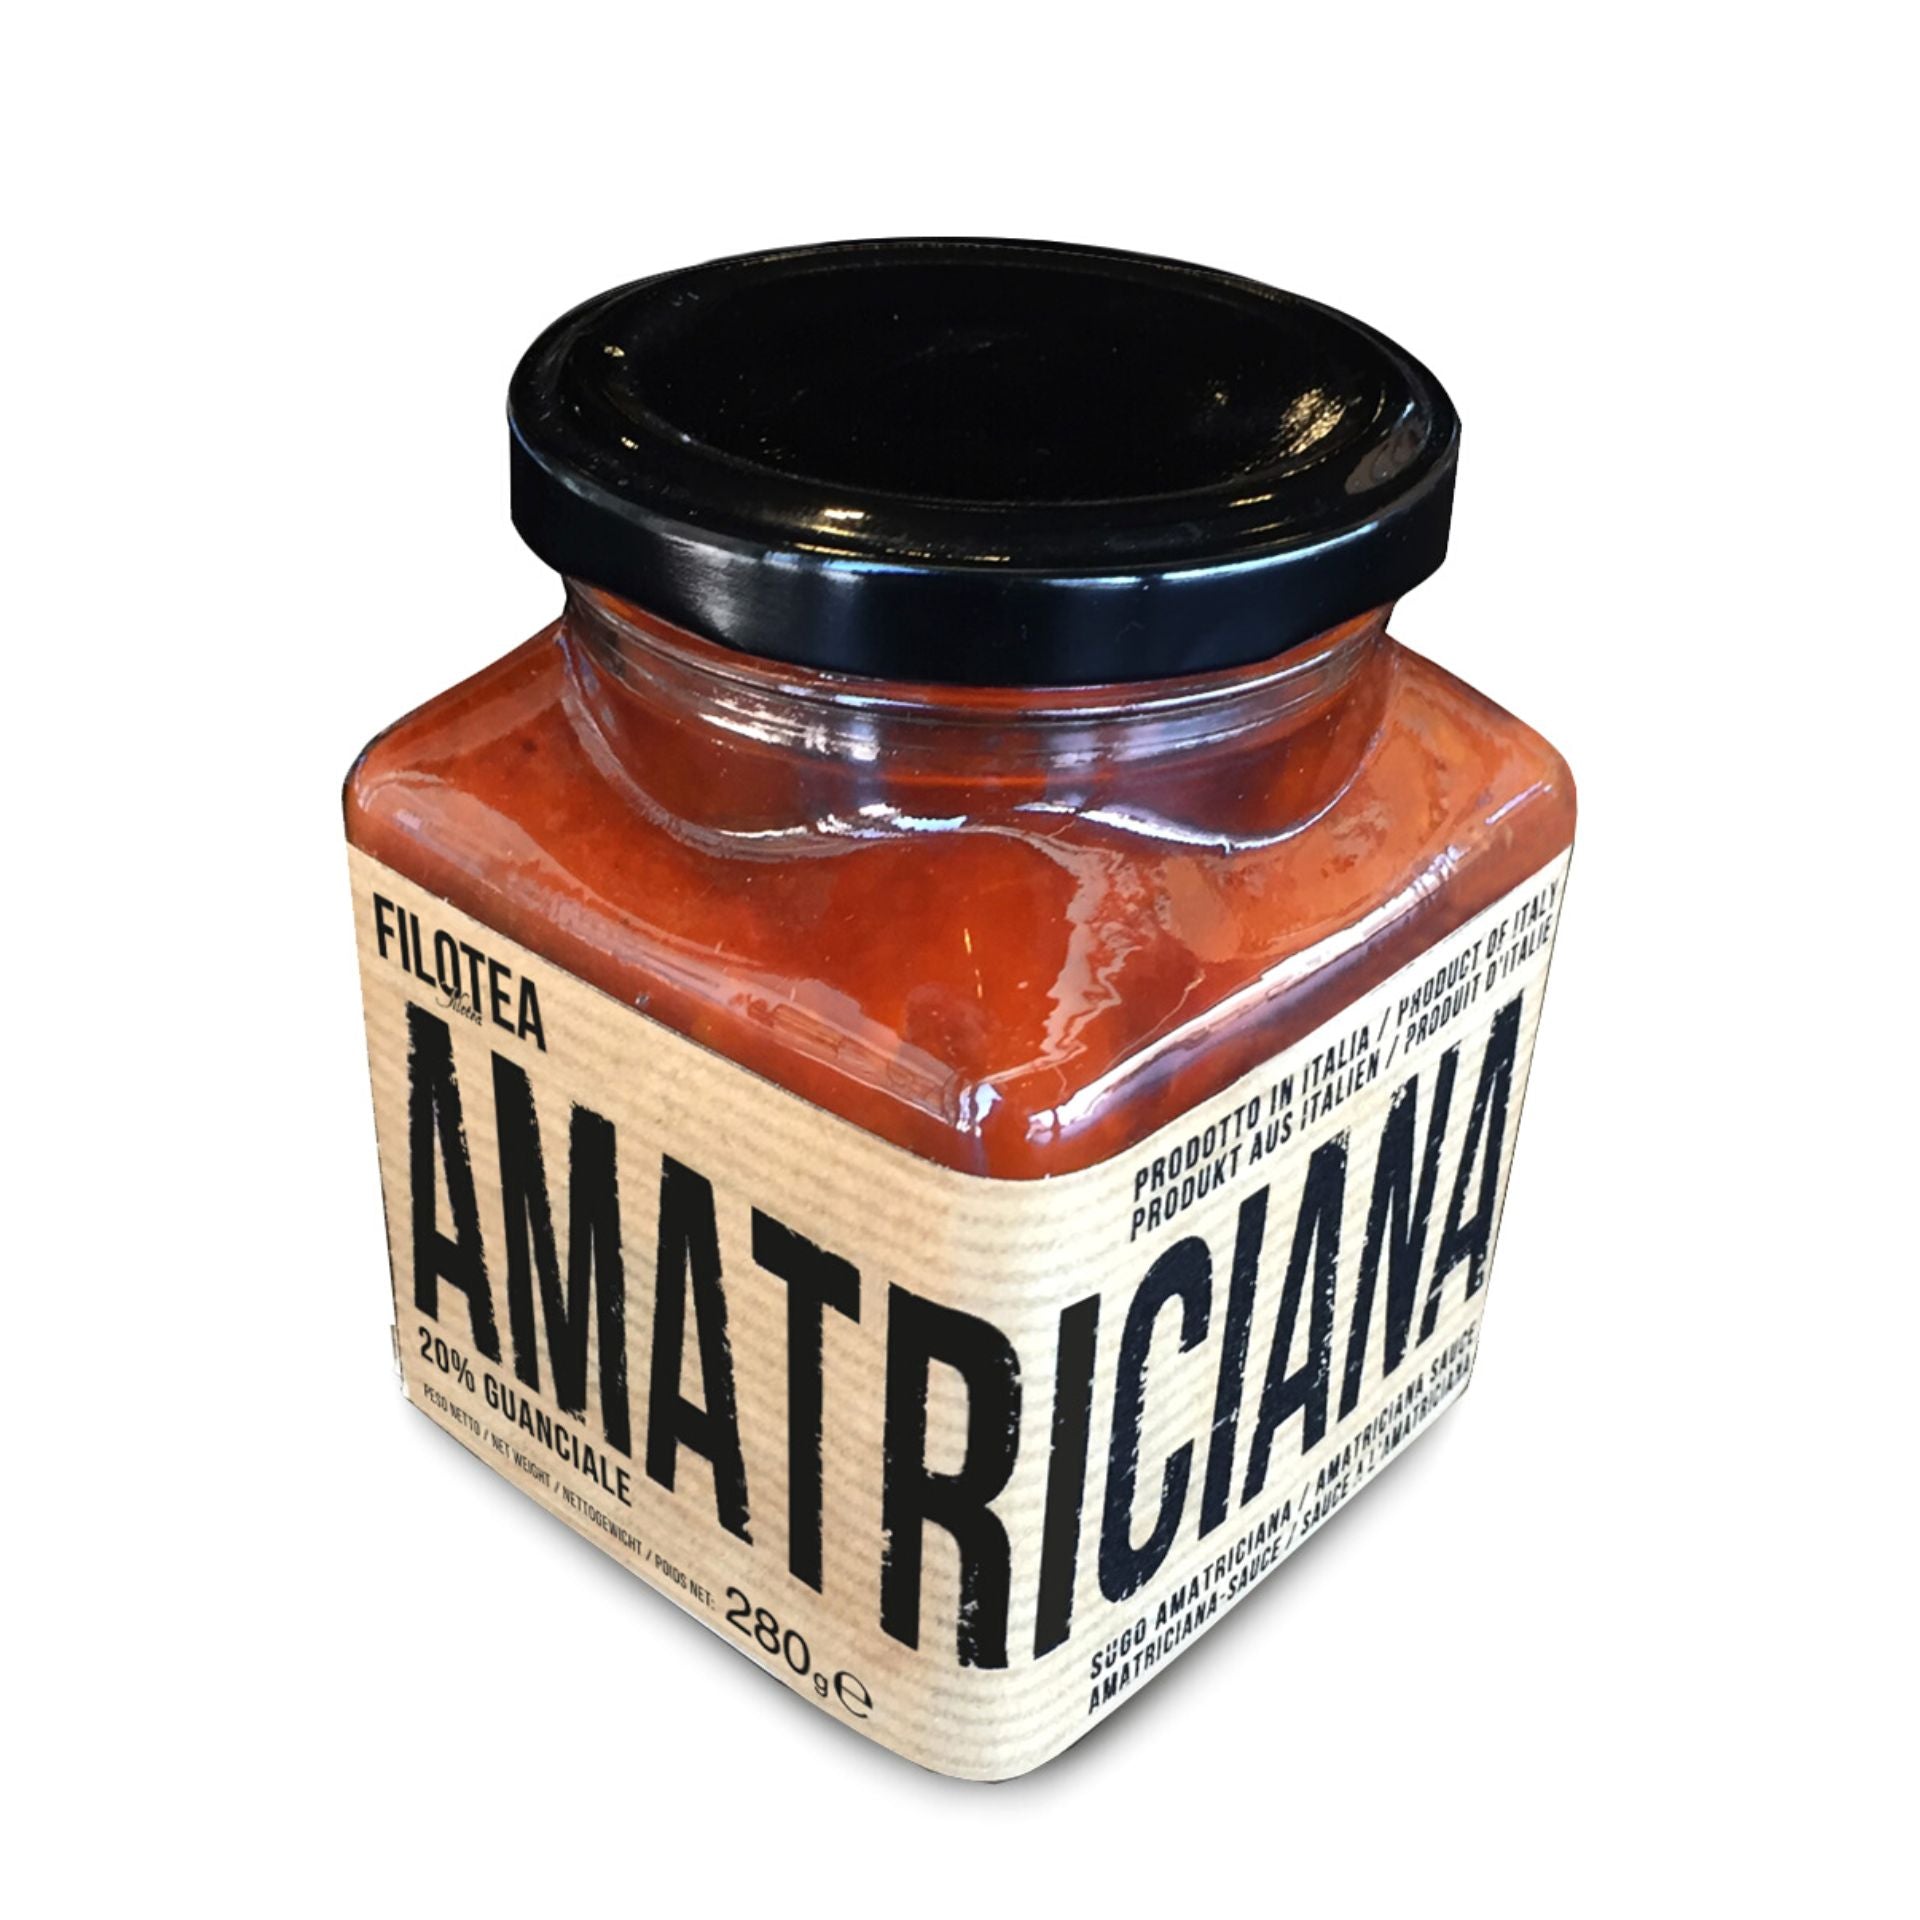 Filotea Amatriciana Pasta Sauce 280g  | Imported and distributed in the UK by Just Gourmet Foods